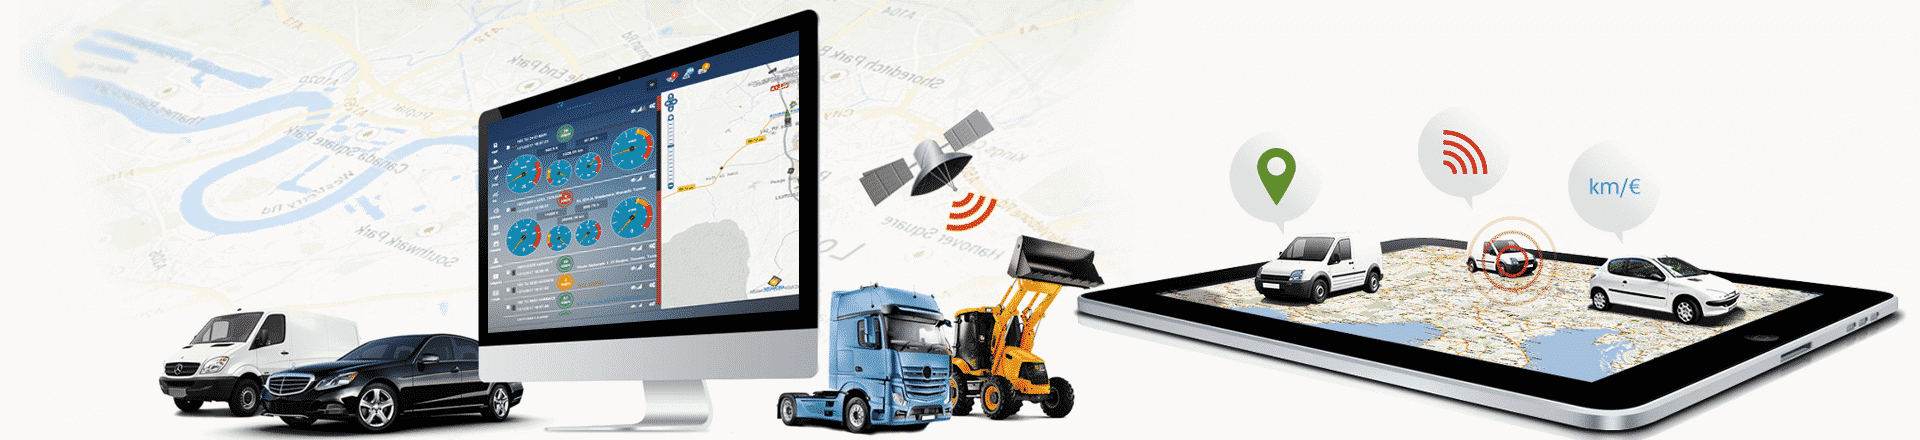 car tracking system